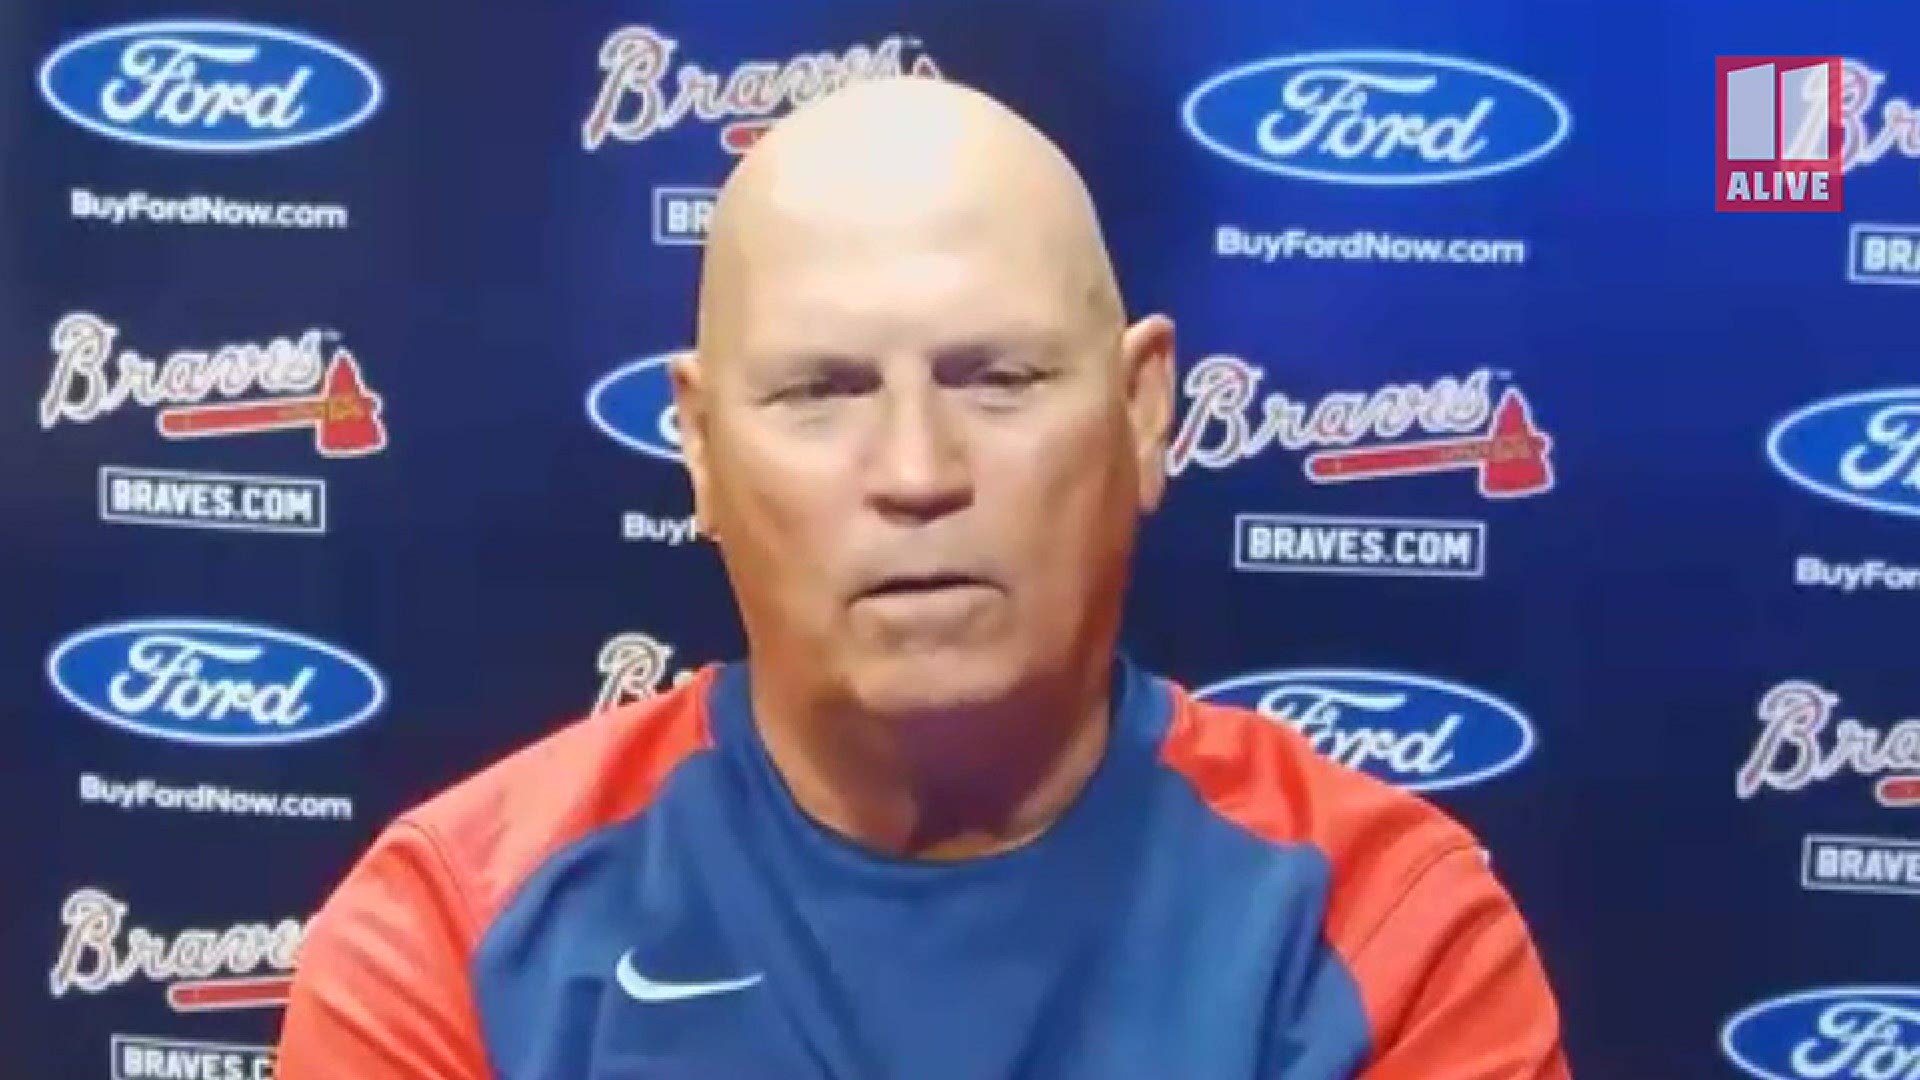 The Braves' coach expressed disappointment that the game wasn't going to be held in Georgia but said very little beyond that during a recent interview.